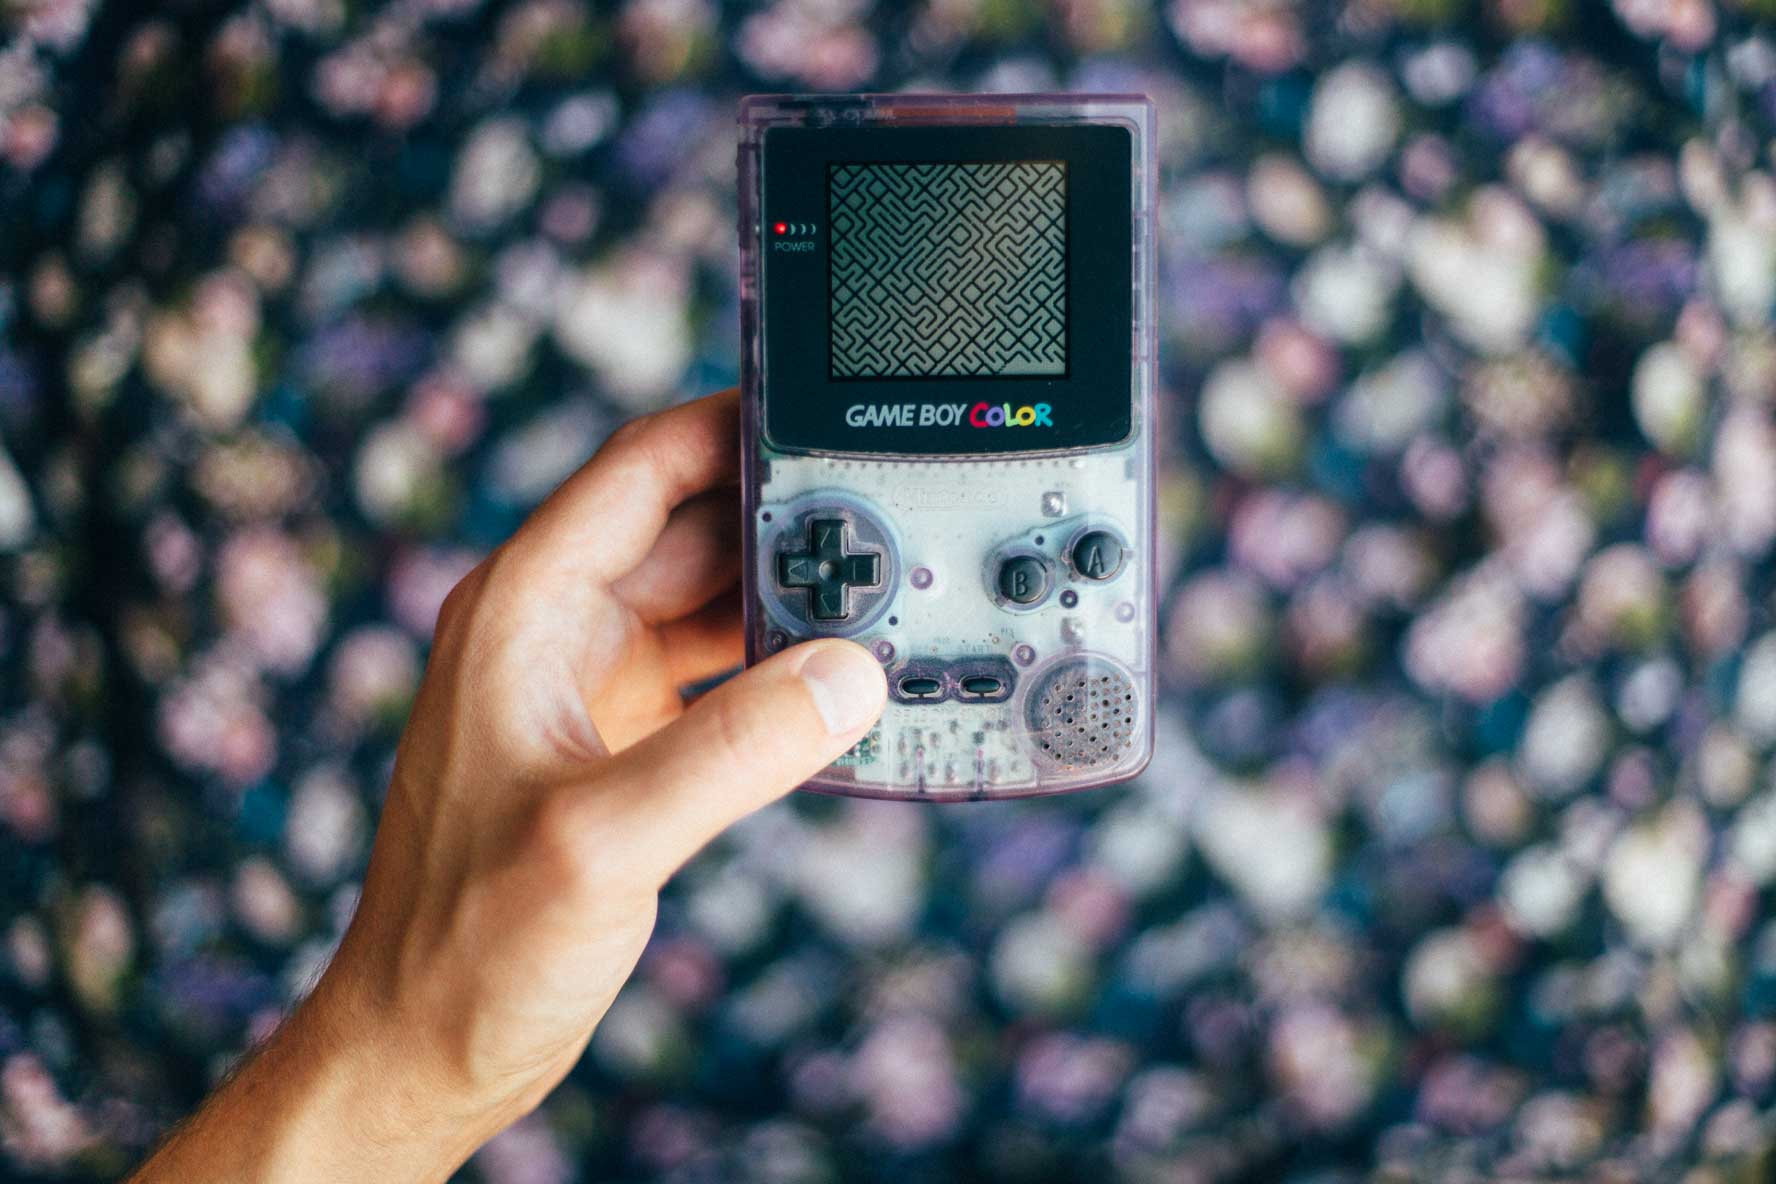 An old handheld video game in transparent, purple plastic. A black and white maze is shown on the screen, and right below it says Game Boy Color.